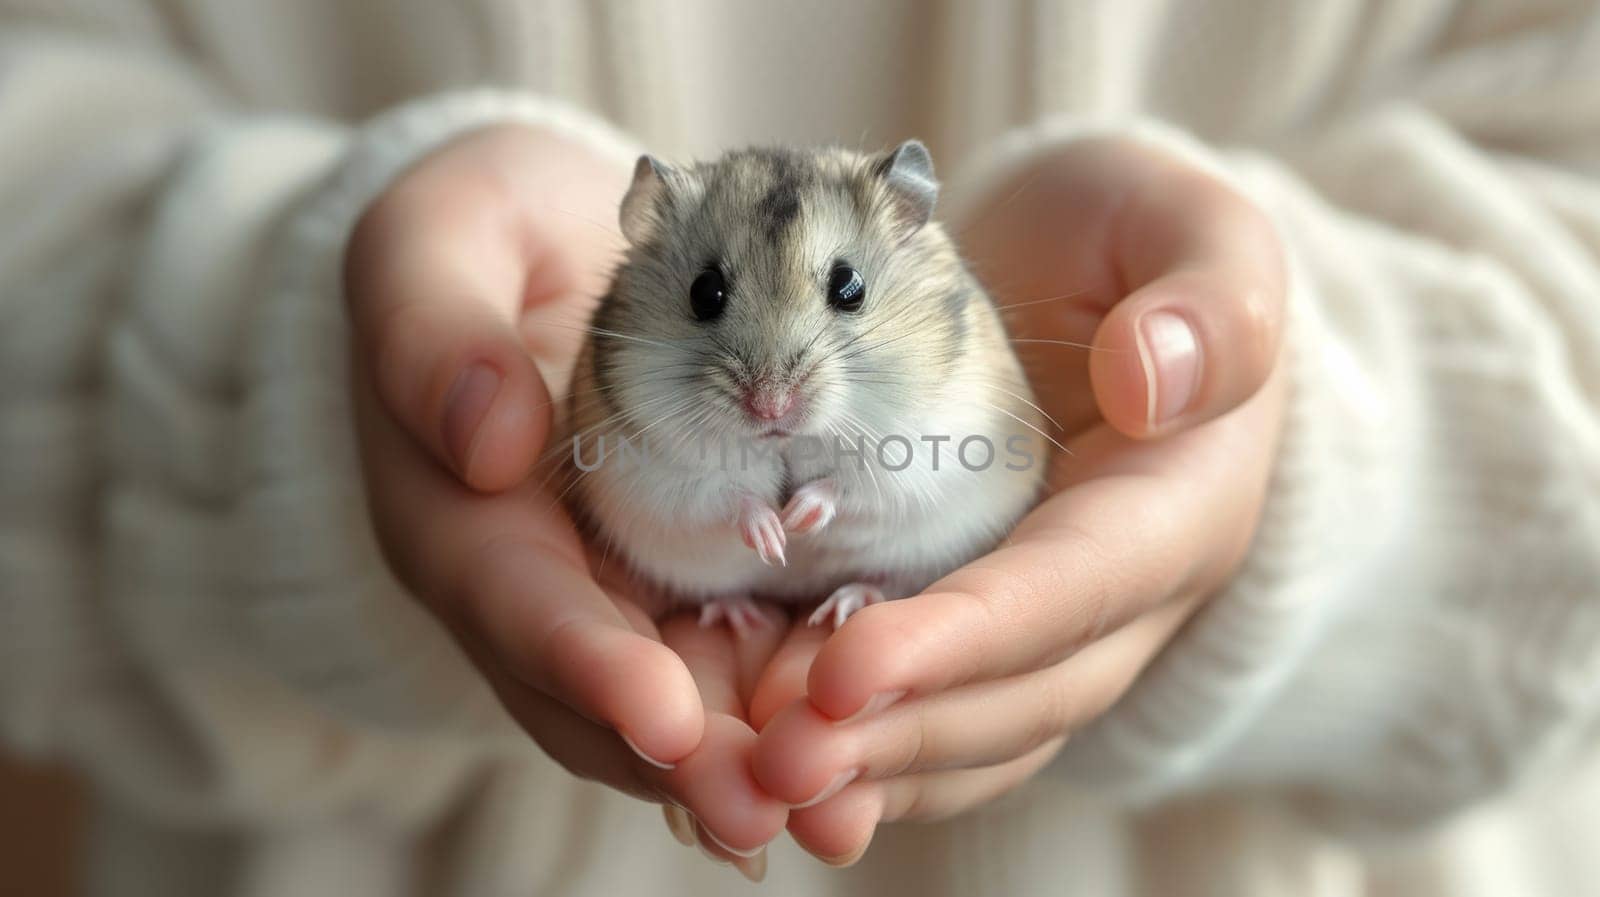 A person holding a small hamster in their hands